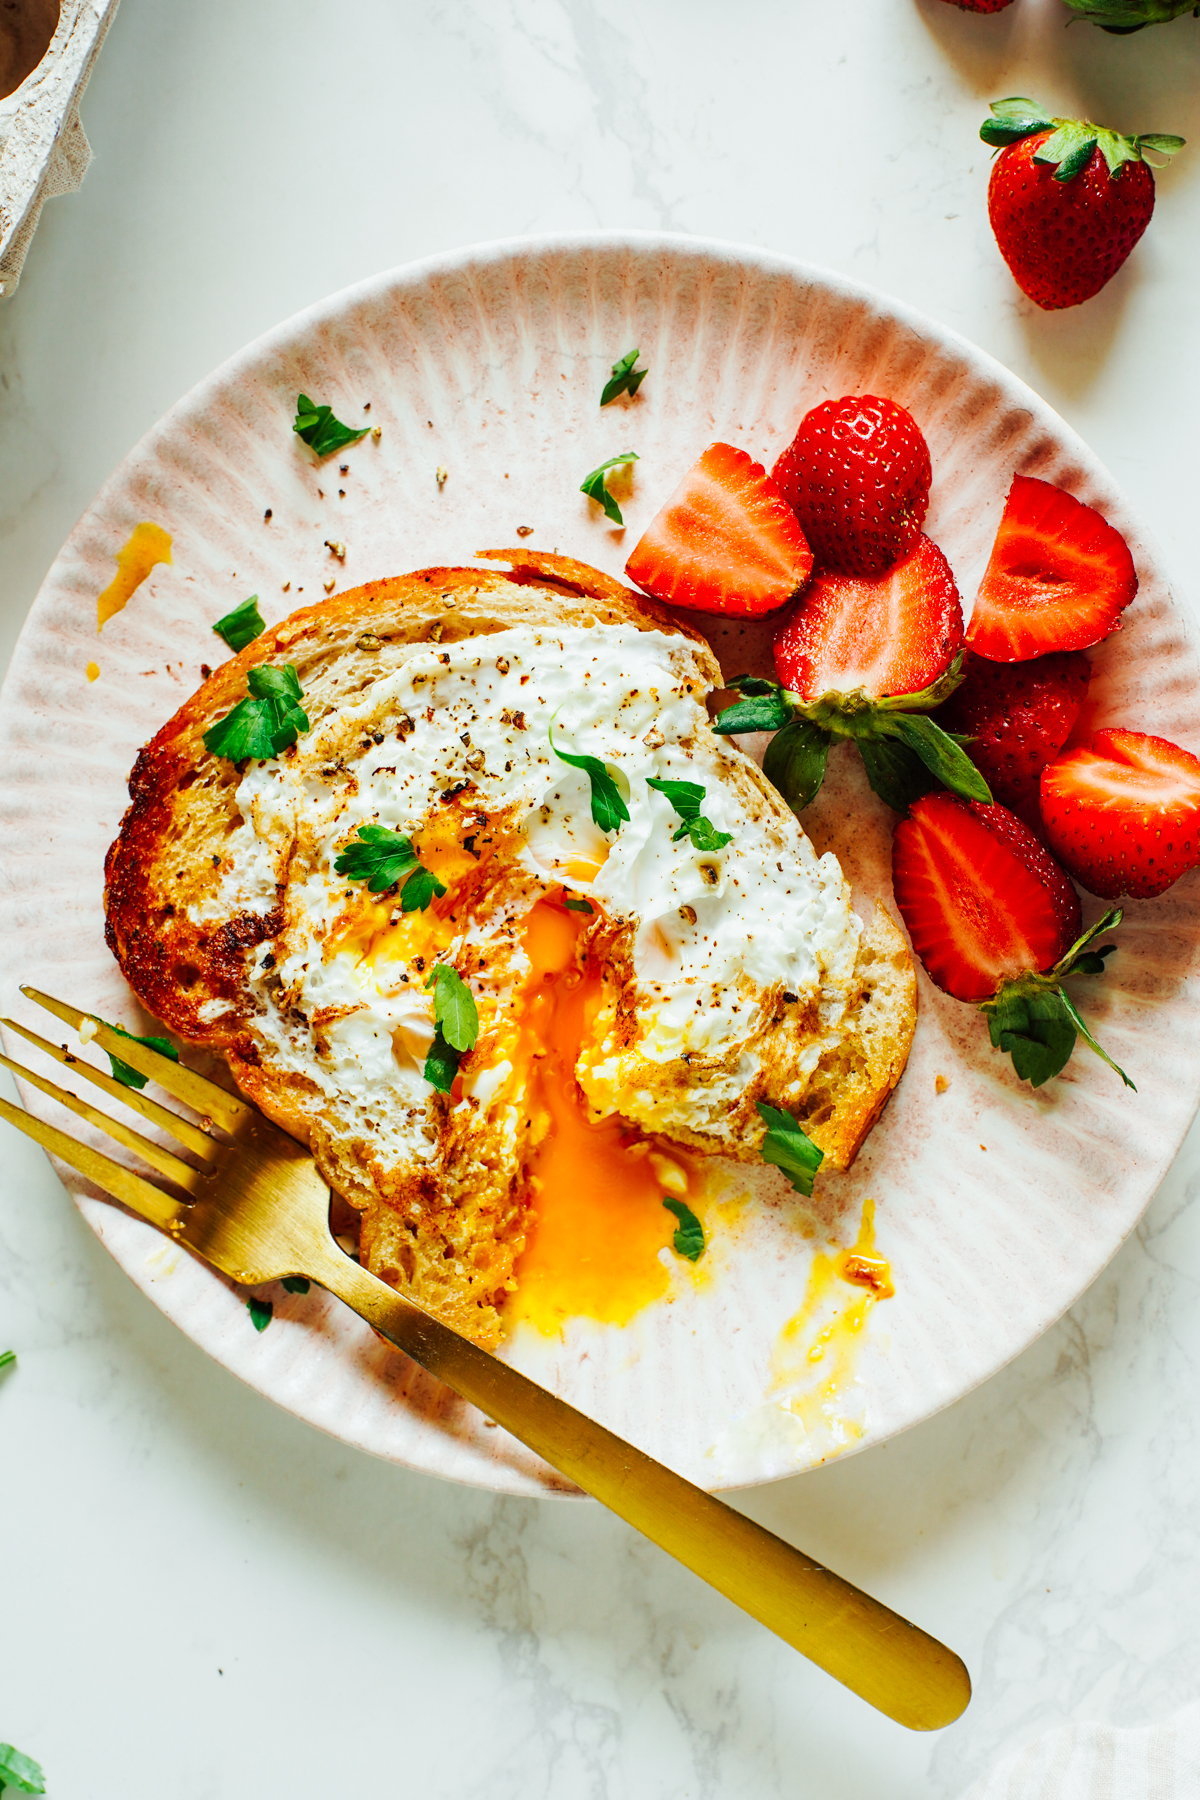 Fried egg with runny yolk in toast on a pink plate with strawberries.